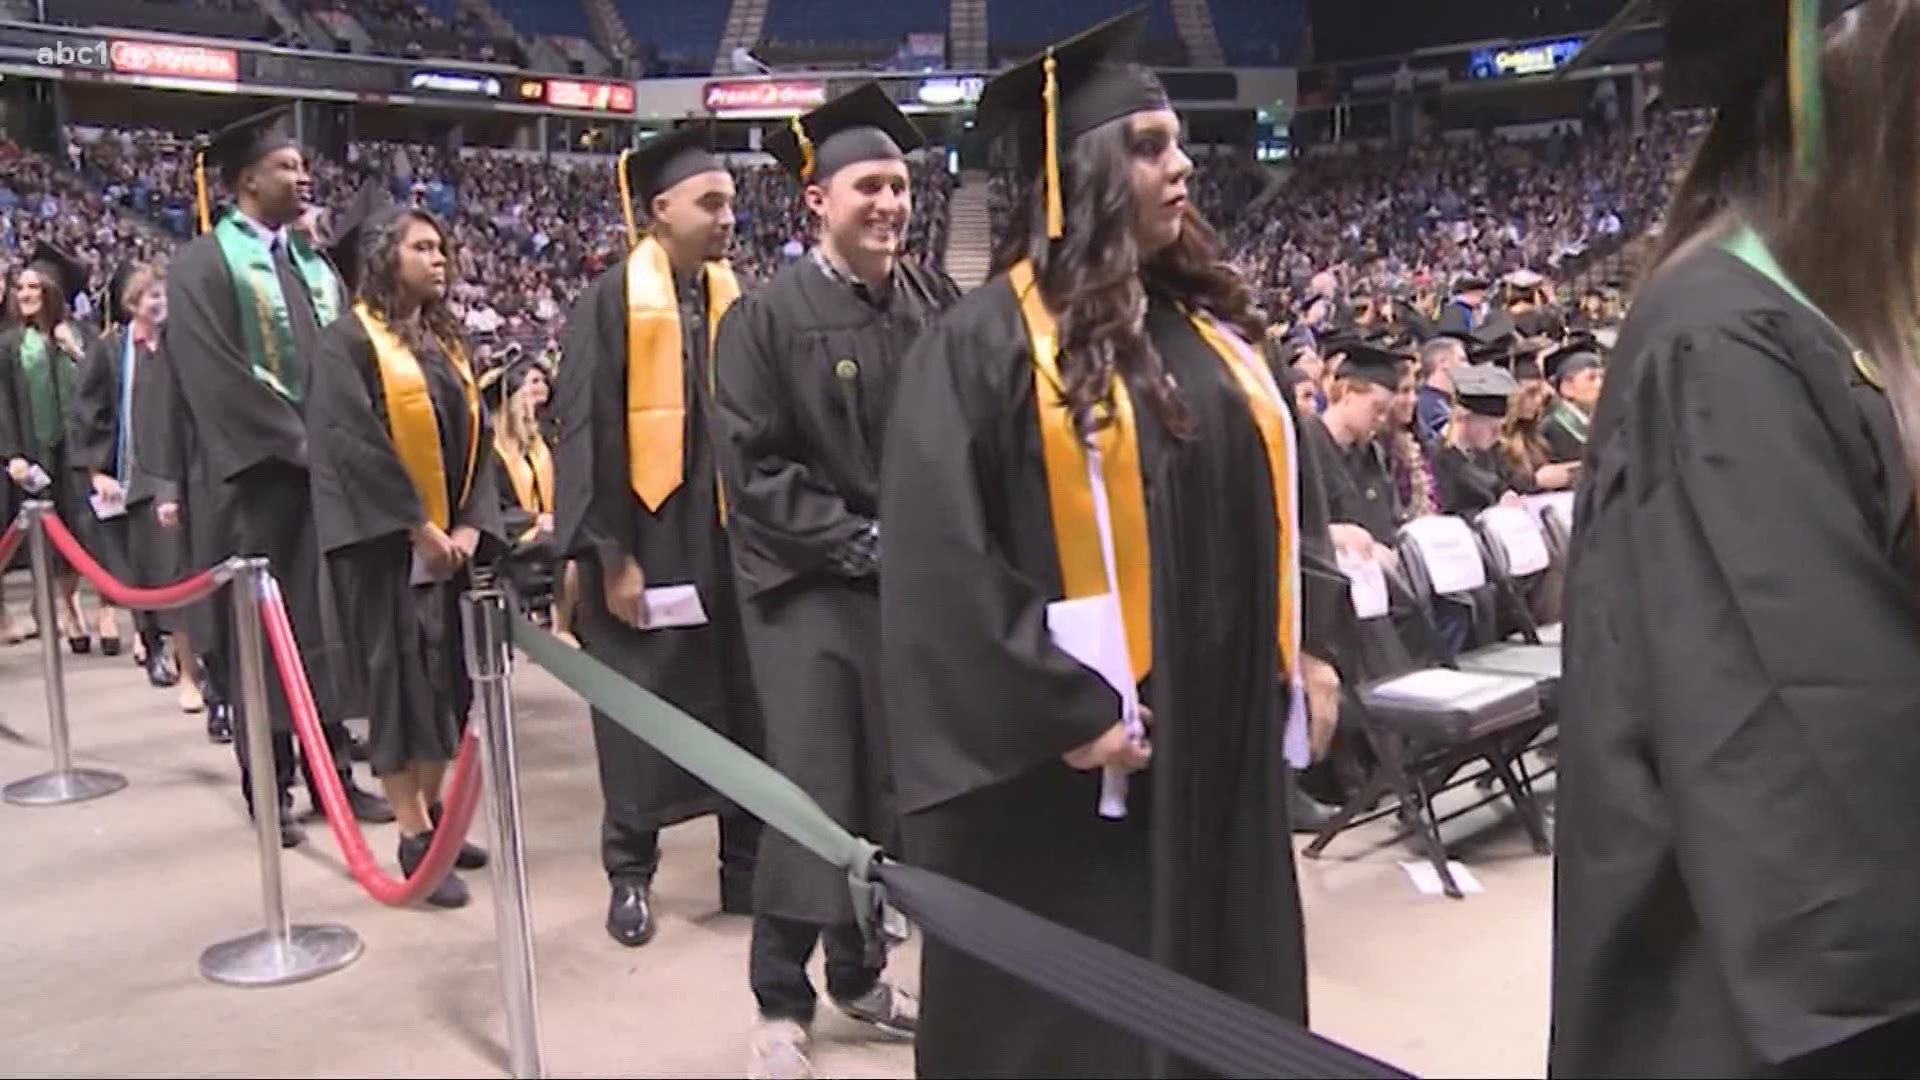 2020 Sac State grads will get virtual commencement ceremony | abc10.com